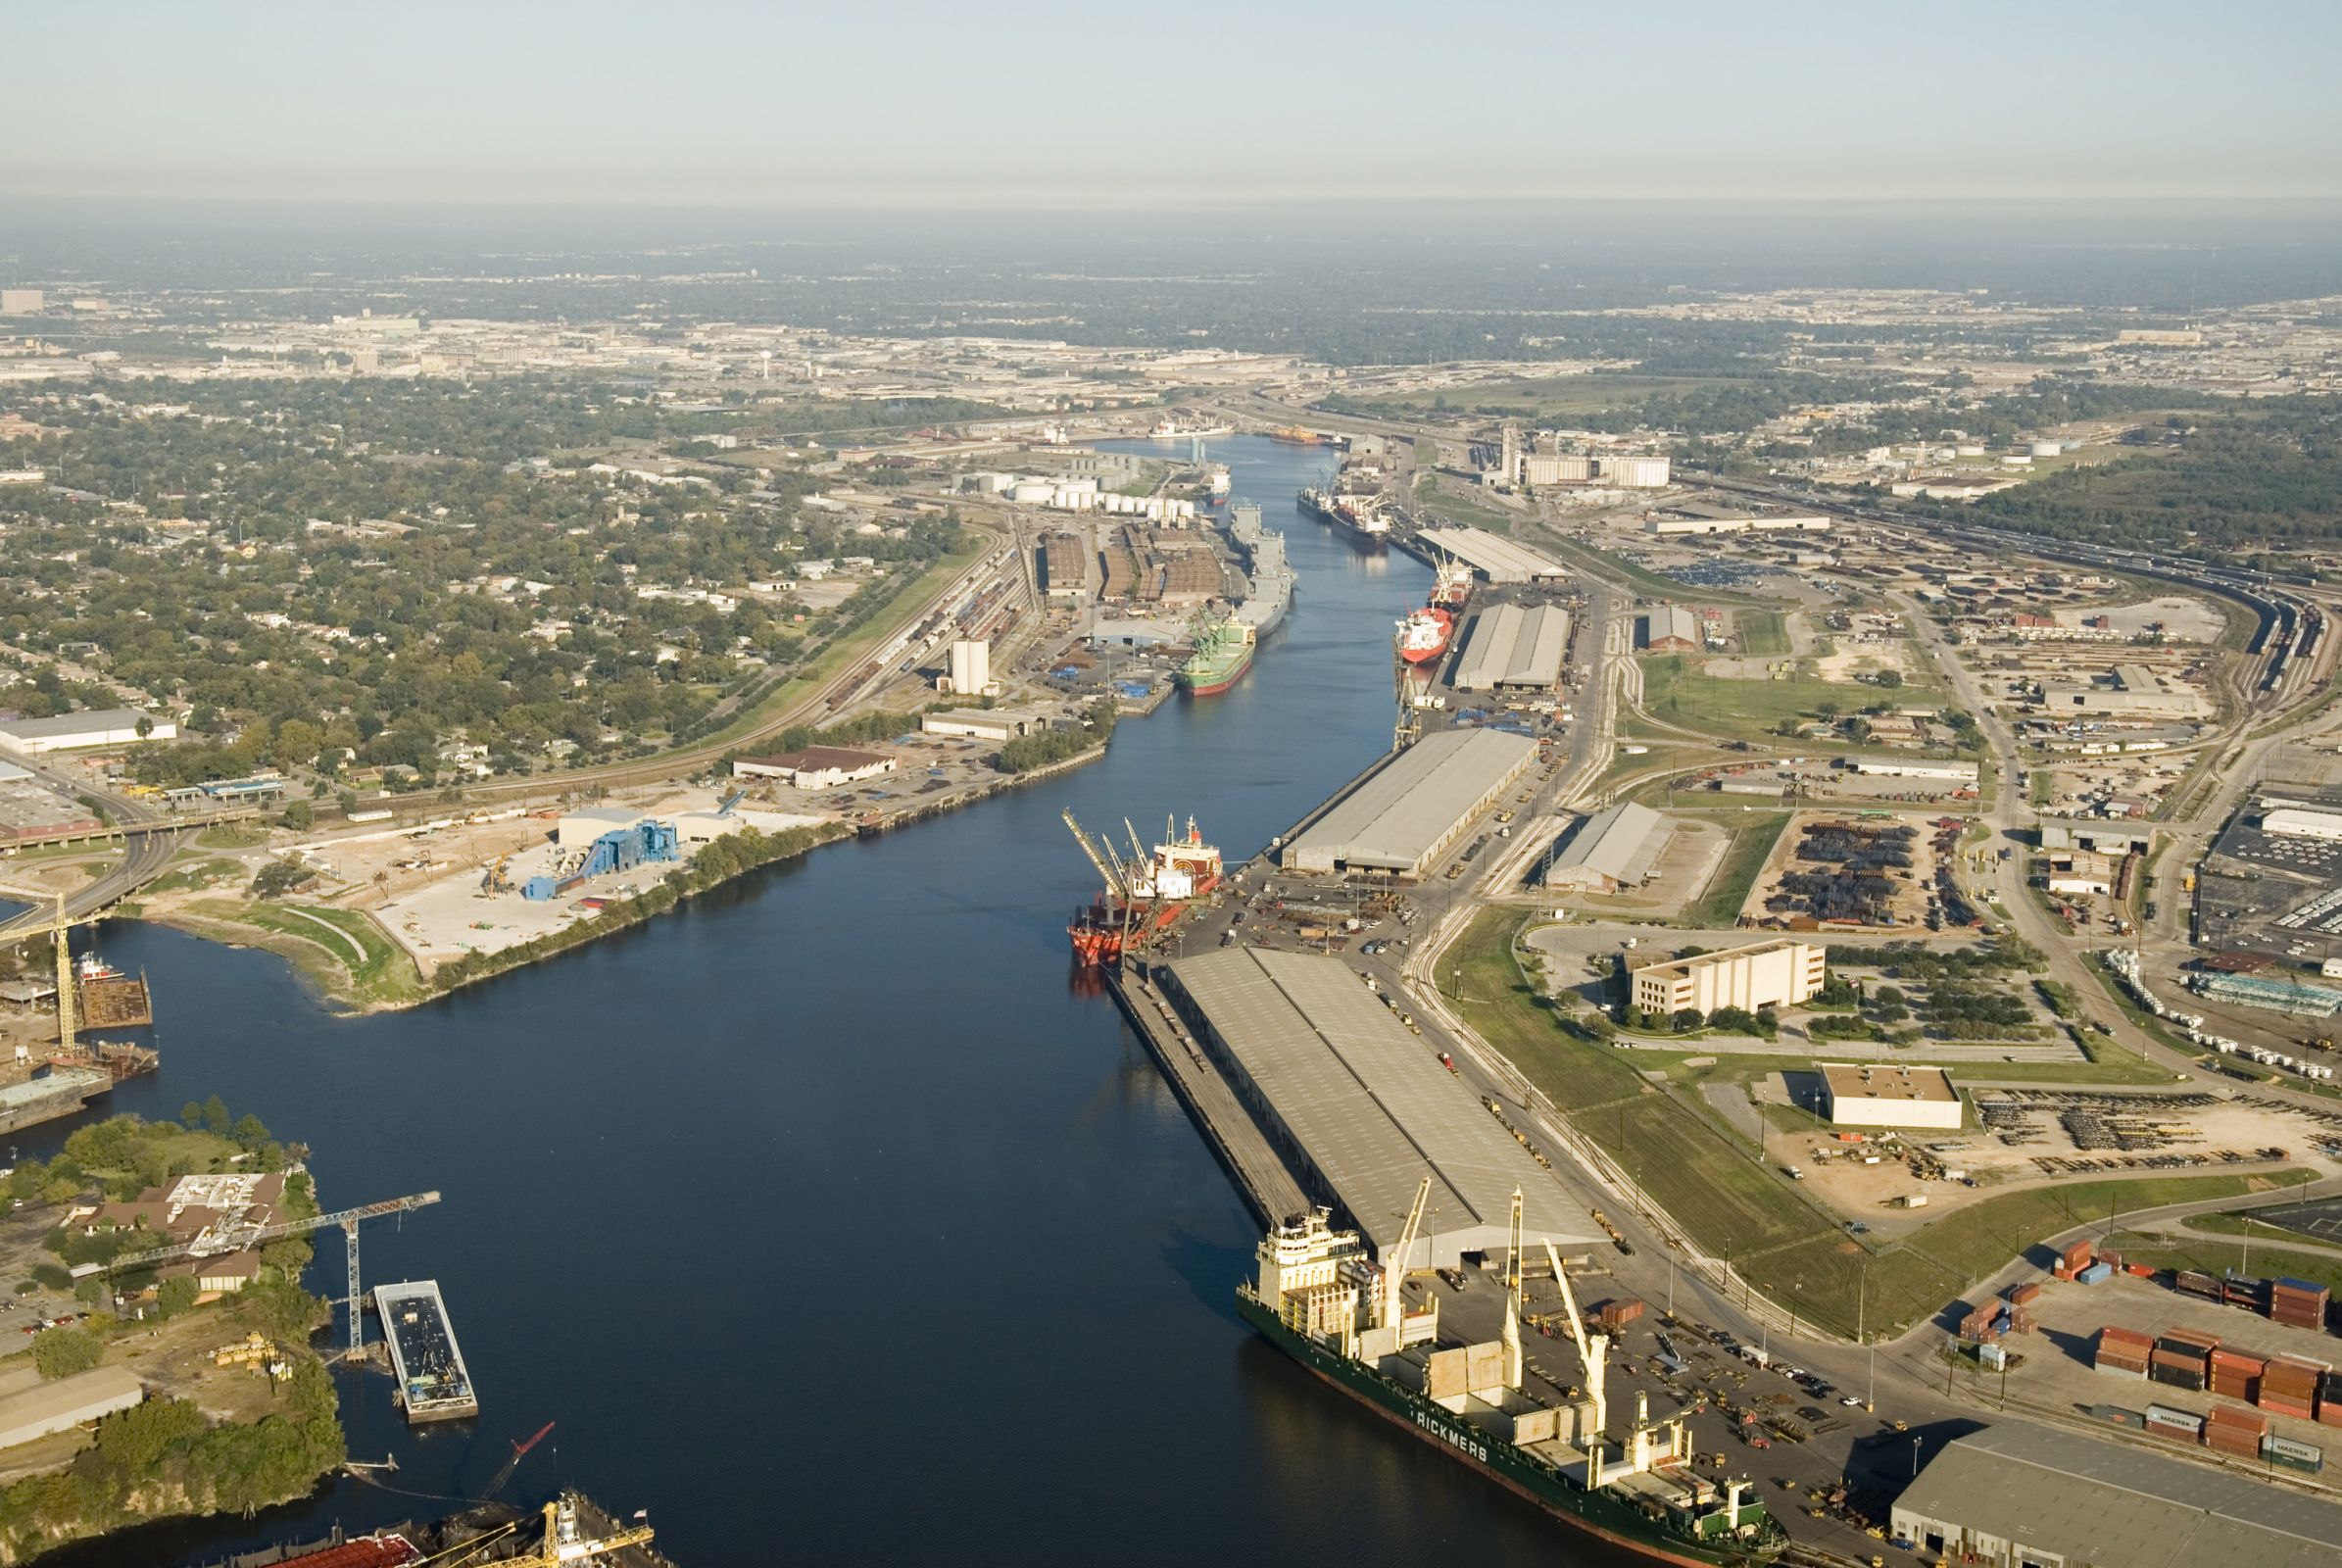 Study: Houston Ship Channel Contributed More Than $900 Billion to U.S. Economy Photo